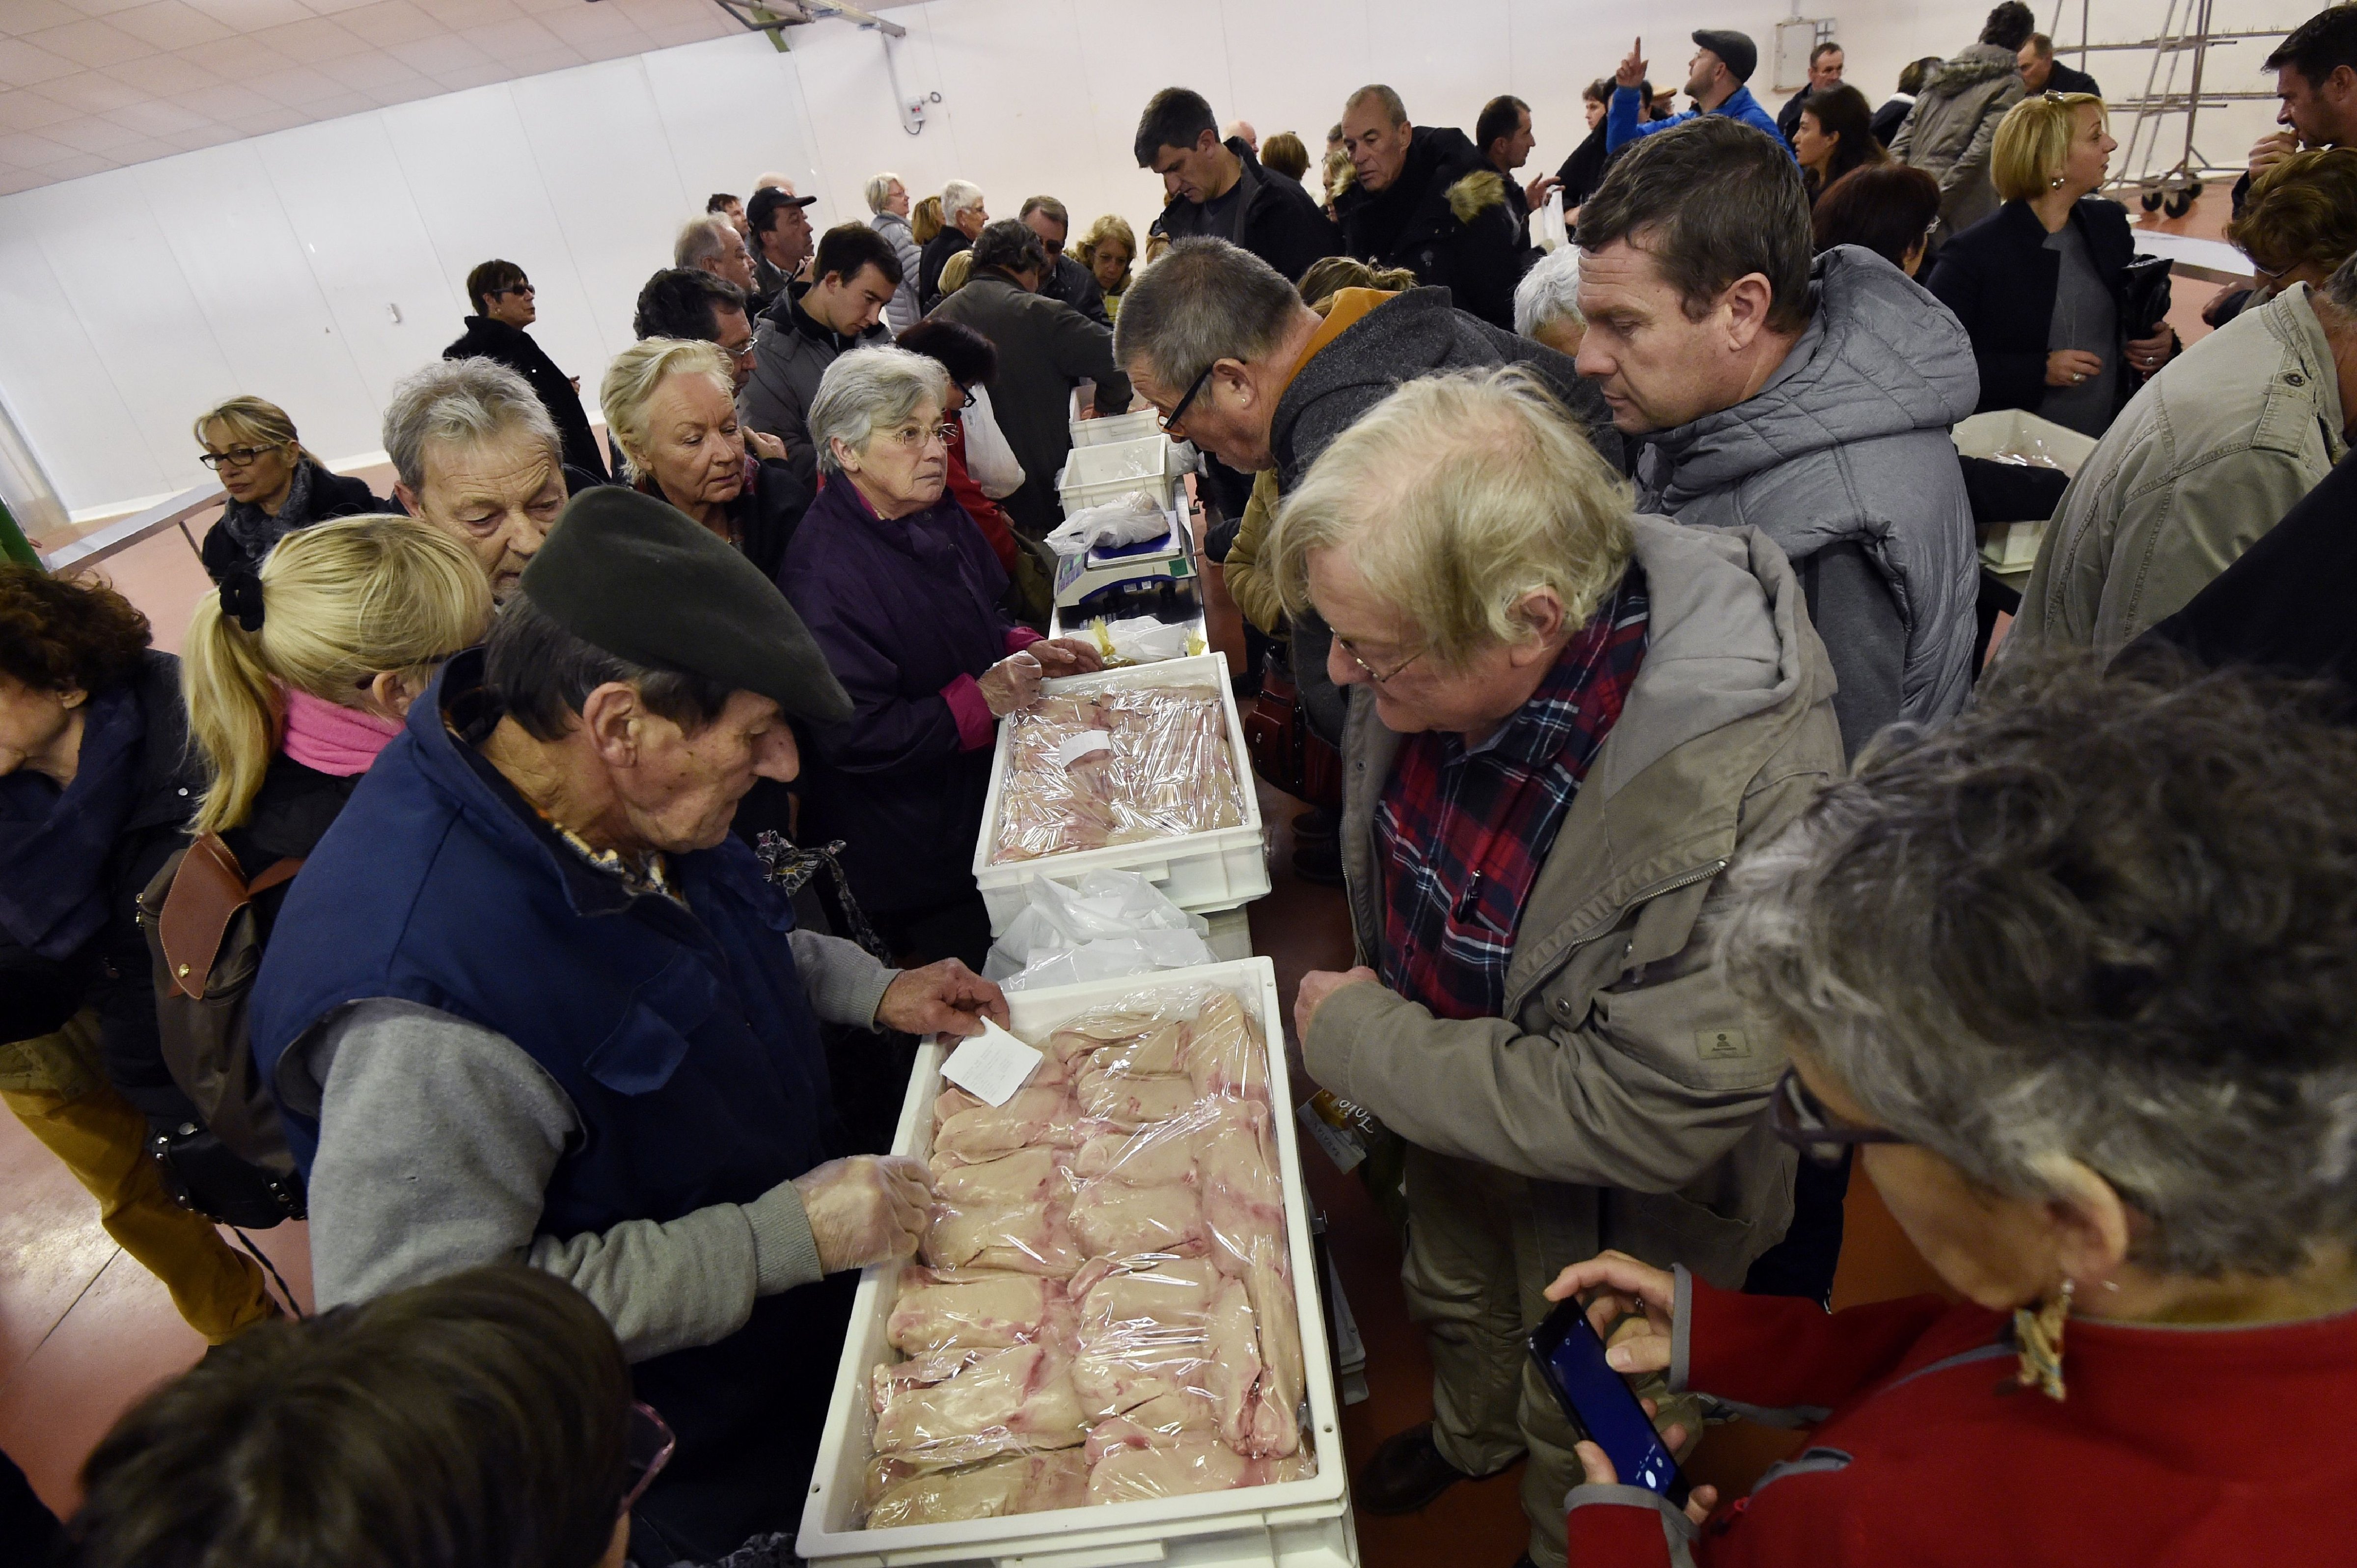 People buy foie groie in the market in Samatan, southwestern France on Dec. 5, 2016. An outbreak of avian influenza H5N8, "highly pathogenic" for birds but "harmless to humans", was detected in a duck farm in the Tarn commune of Almayrac, announced on Dec. 2, 2016 the Ministry of Agriculture. (Pascal Pavani—AFP/Getty Images)